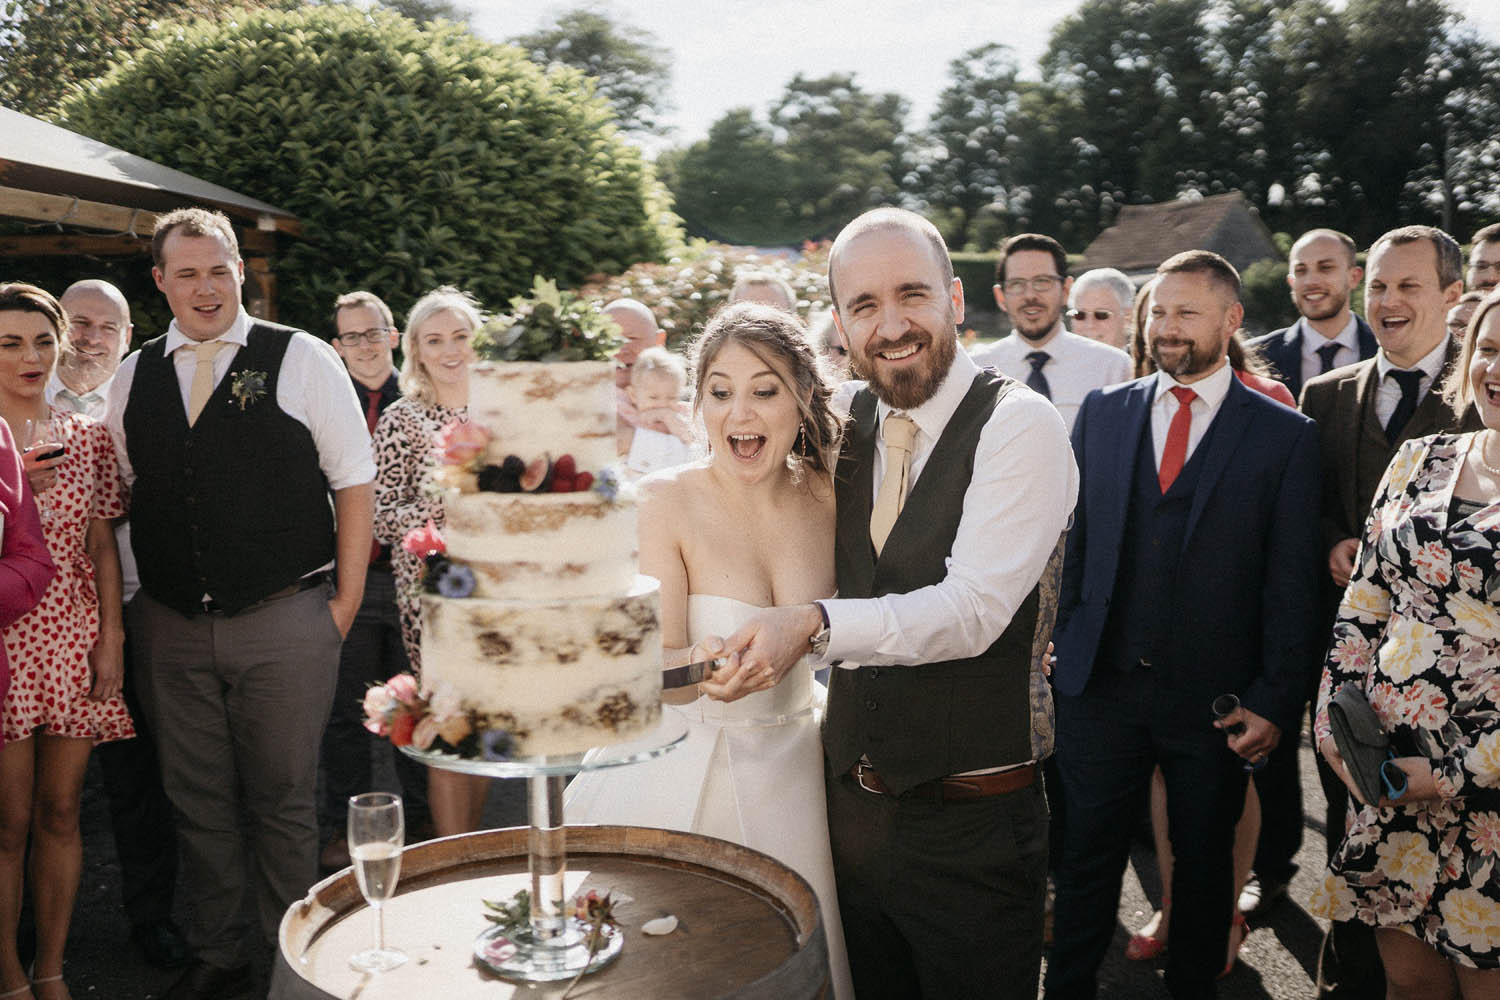 Cake cutting outside at The Manor Estate - Will Stedman Photography